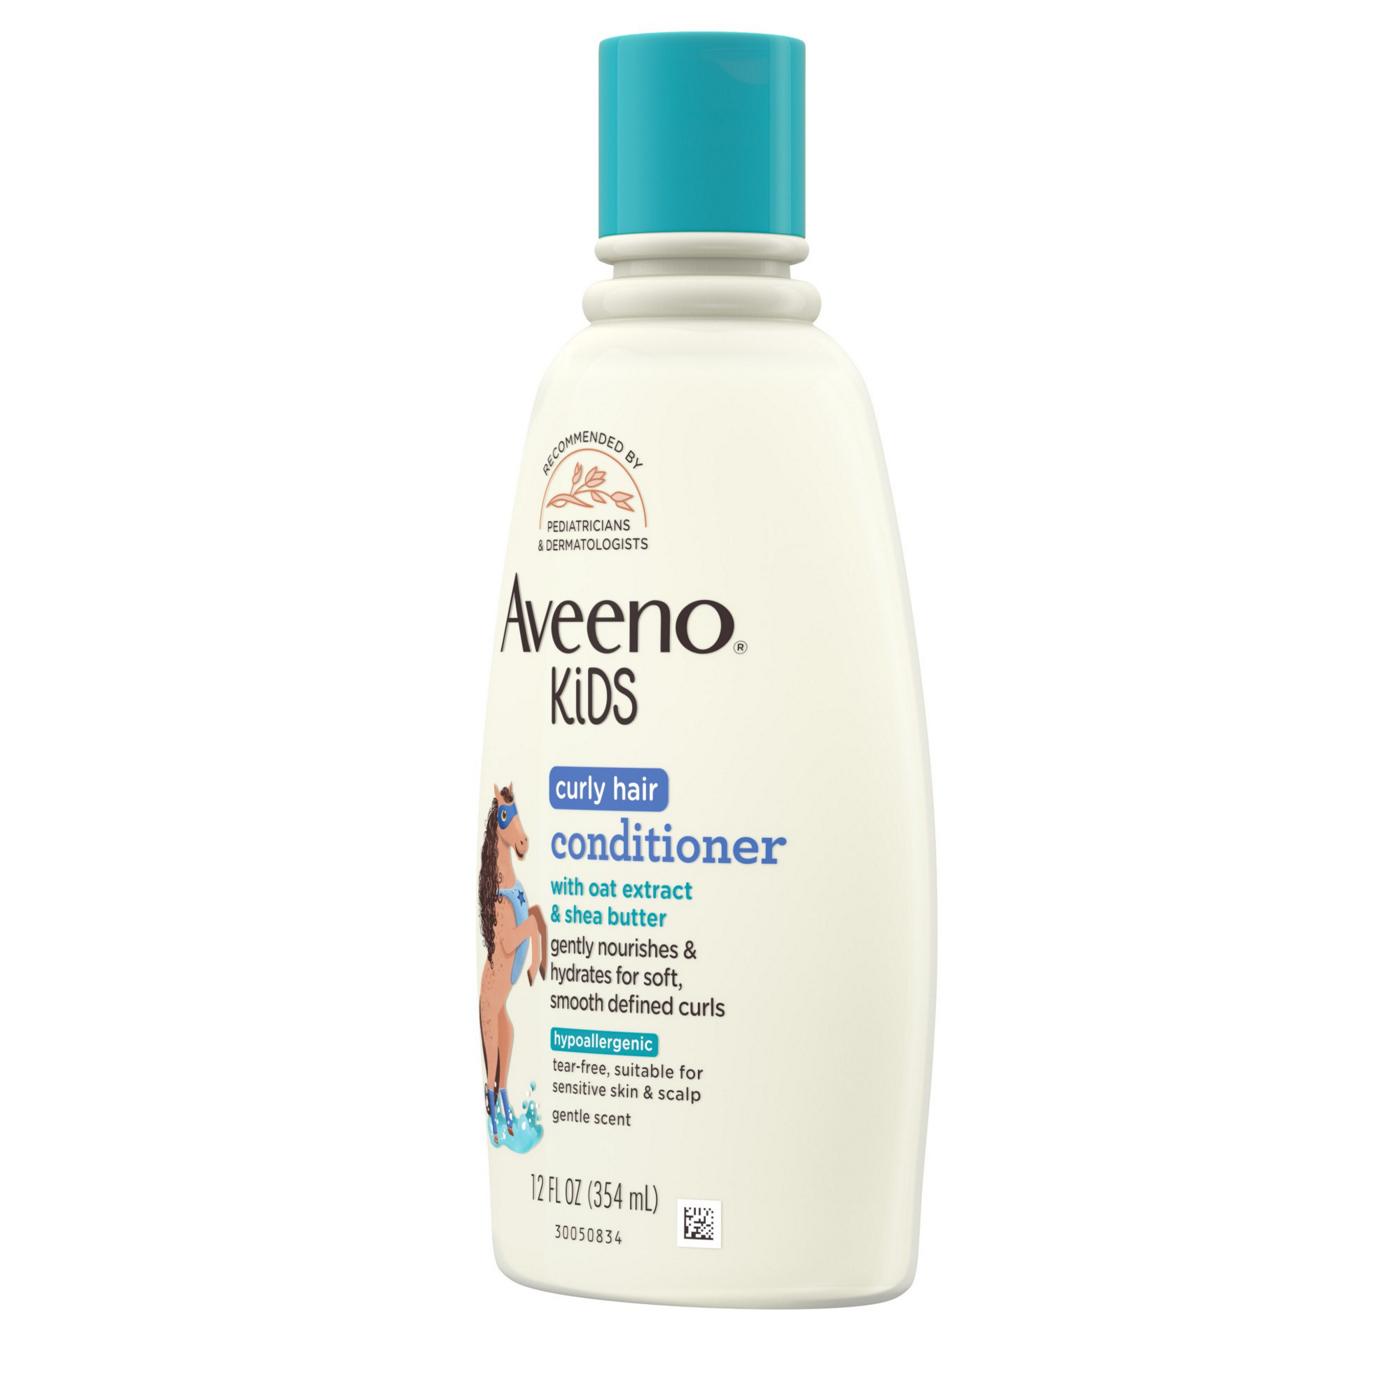 Aveeno Kids Curly Hair Conditioner; image 2 of 5